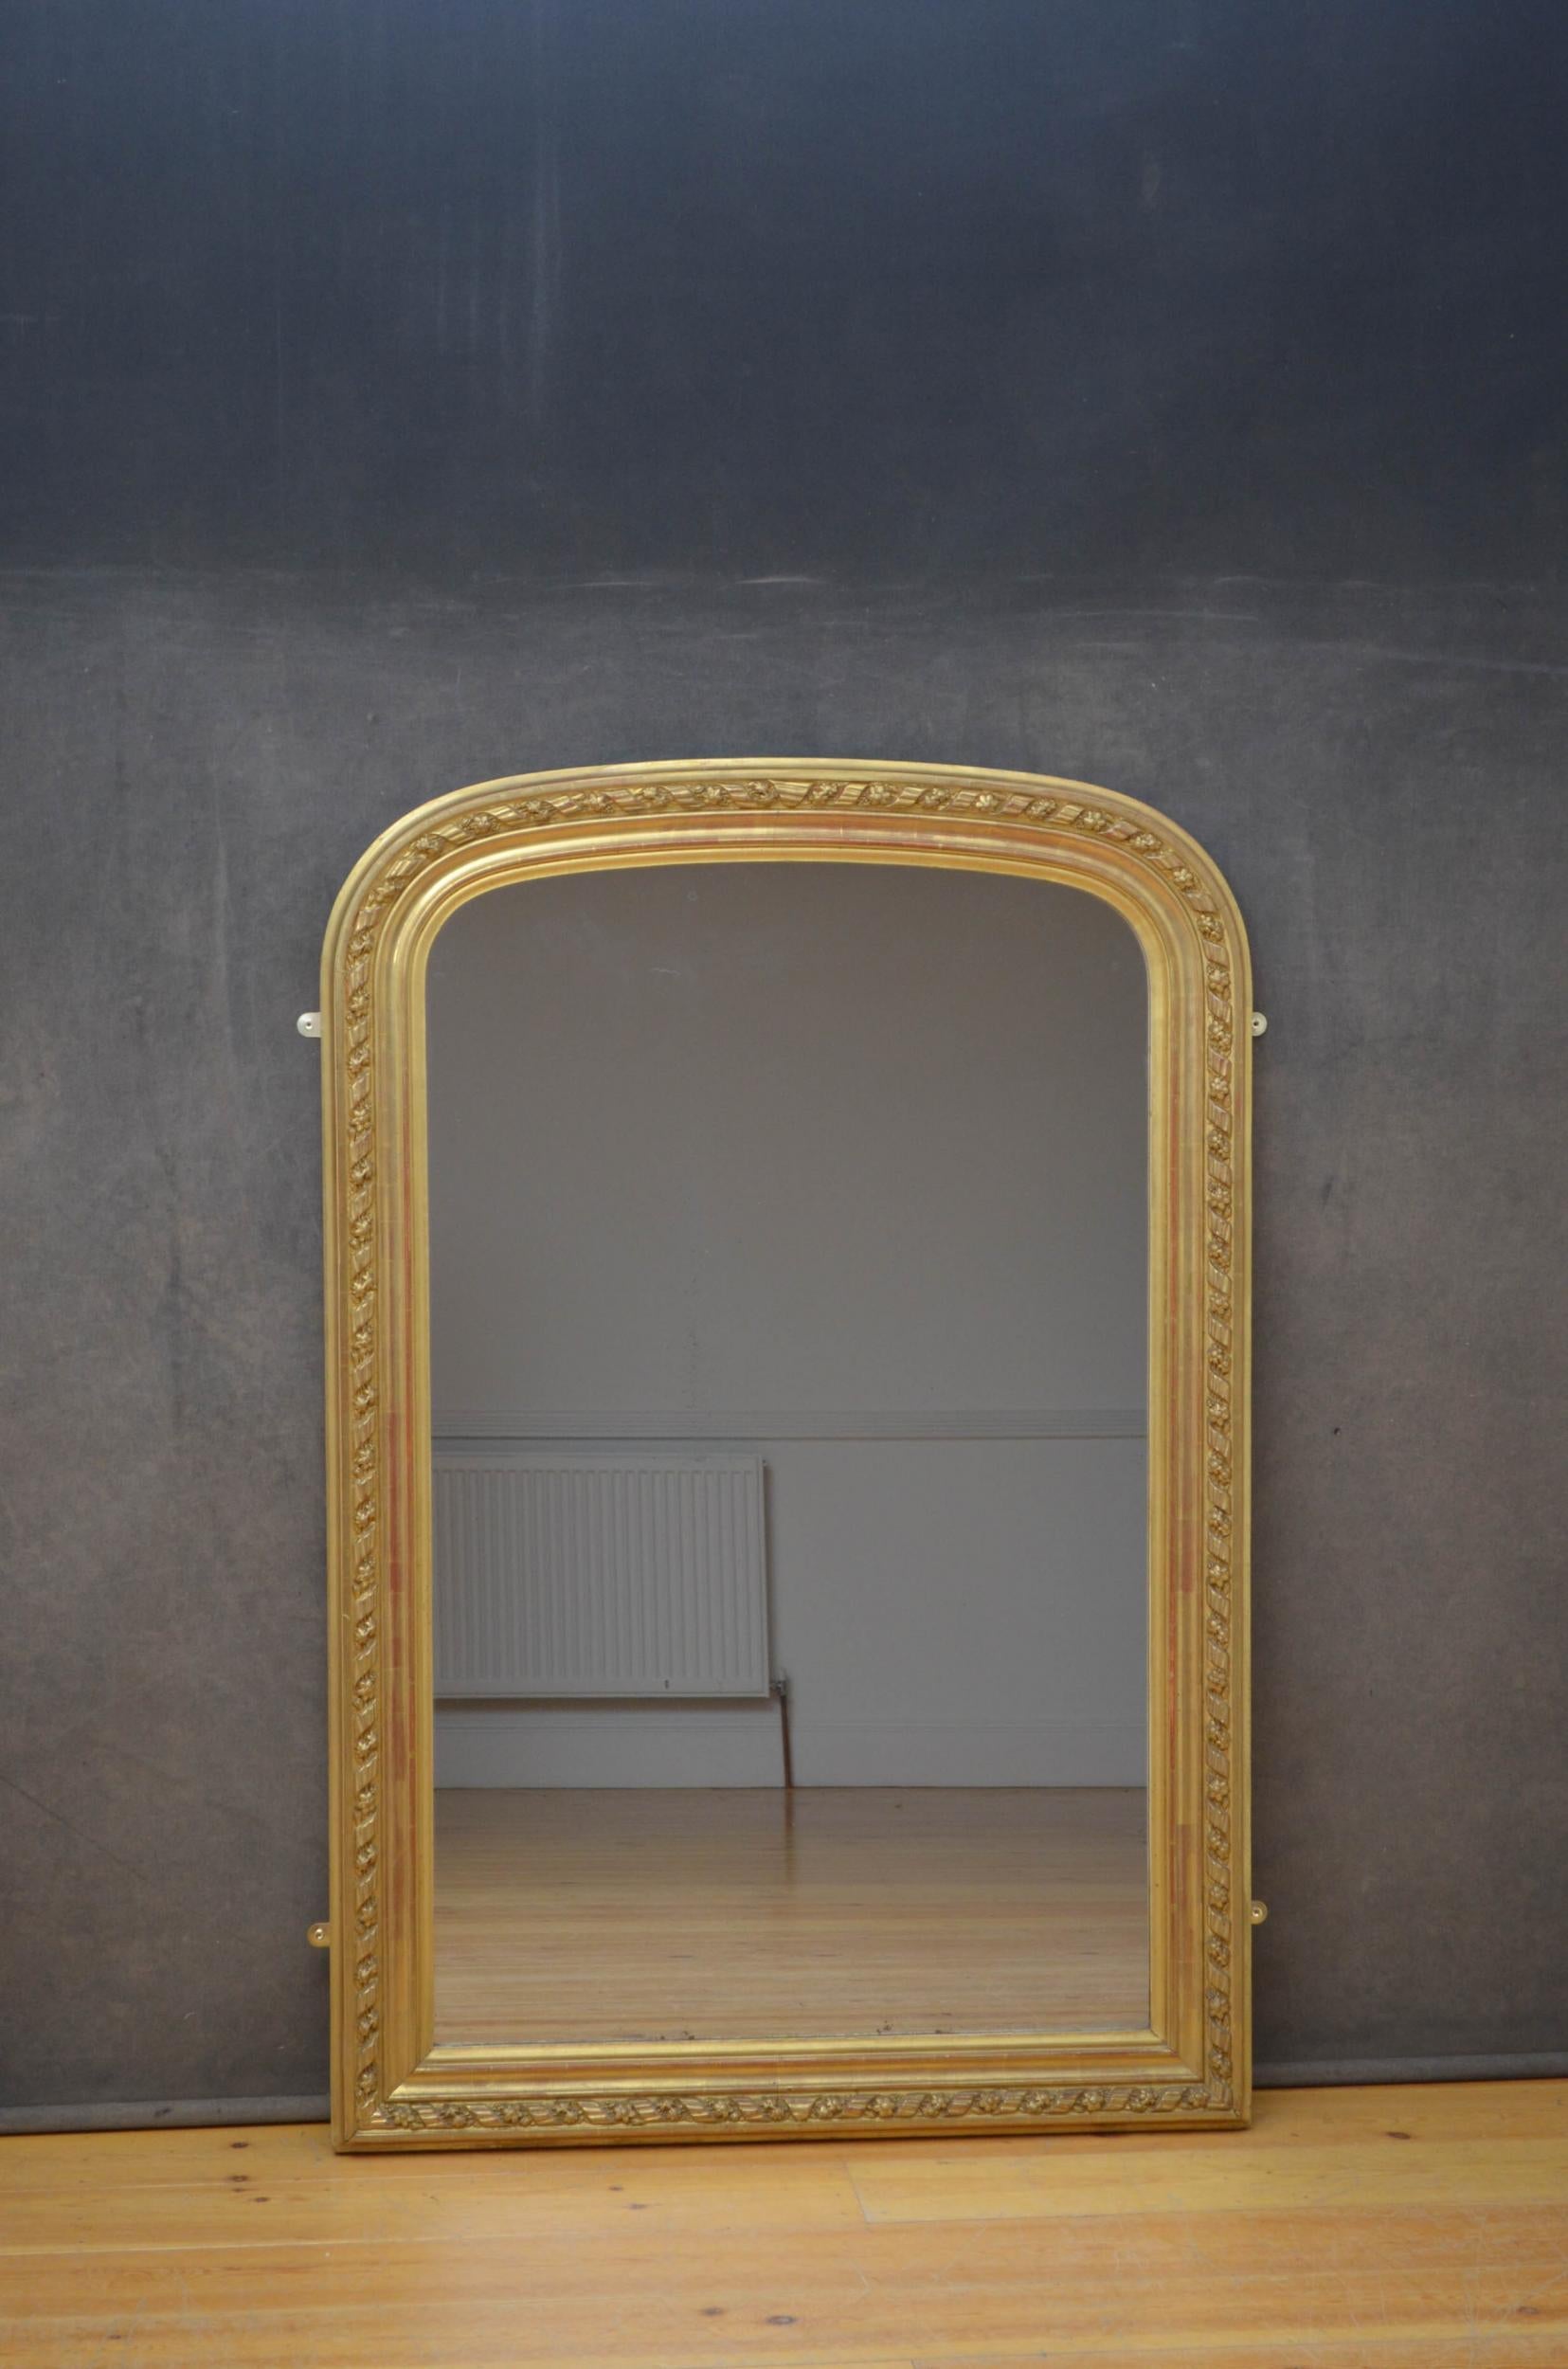 Sn4980, elegant French gilded overmantel mirror, having original mirror plate with some foxing in moulded and floral carved giltwood frame. This antique wall mirror retains its original glass, original gilt and original backboards, all in wonderful